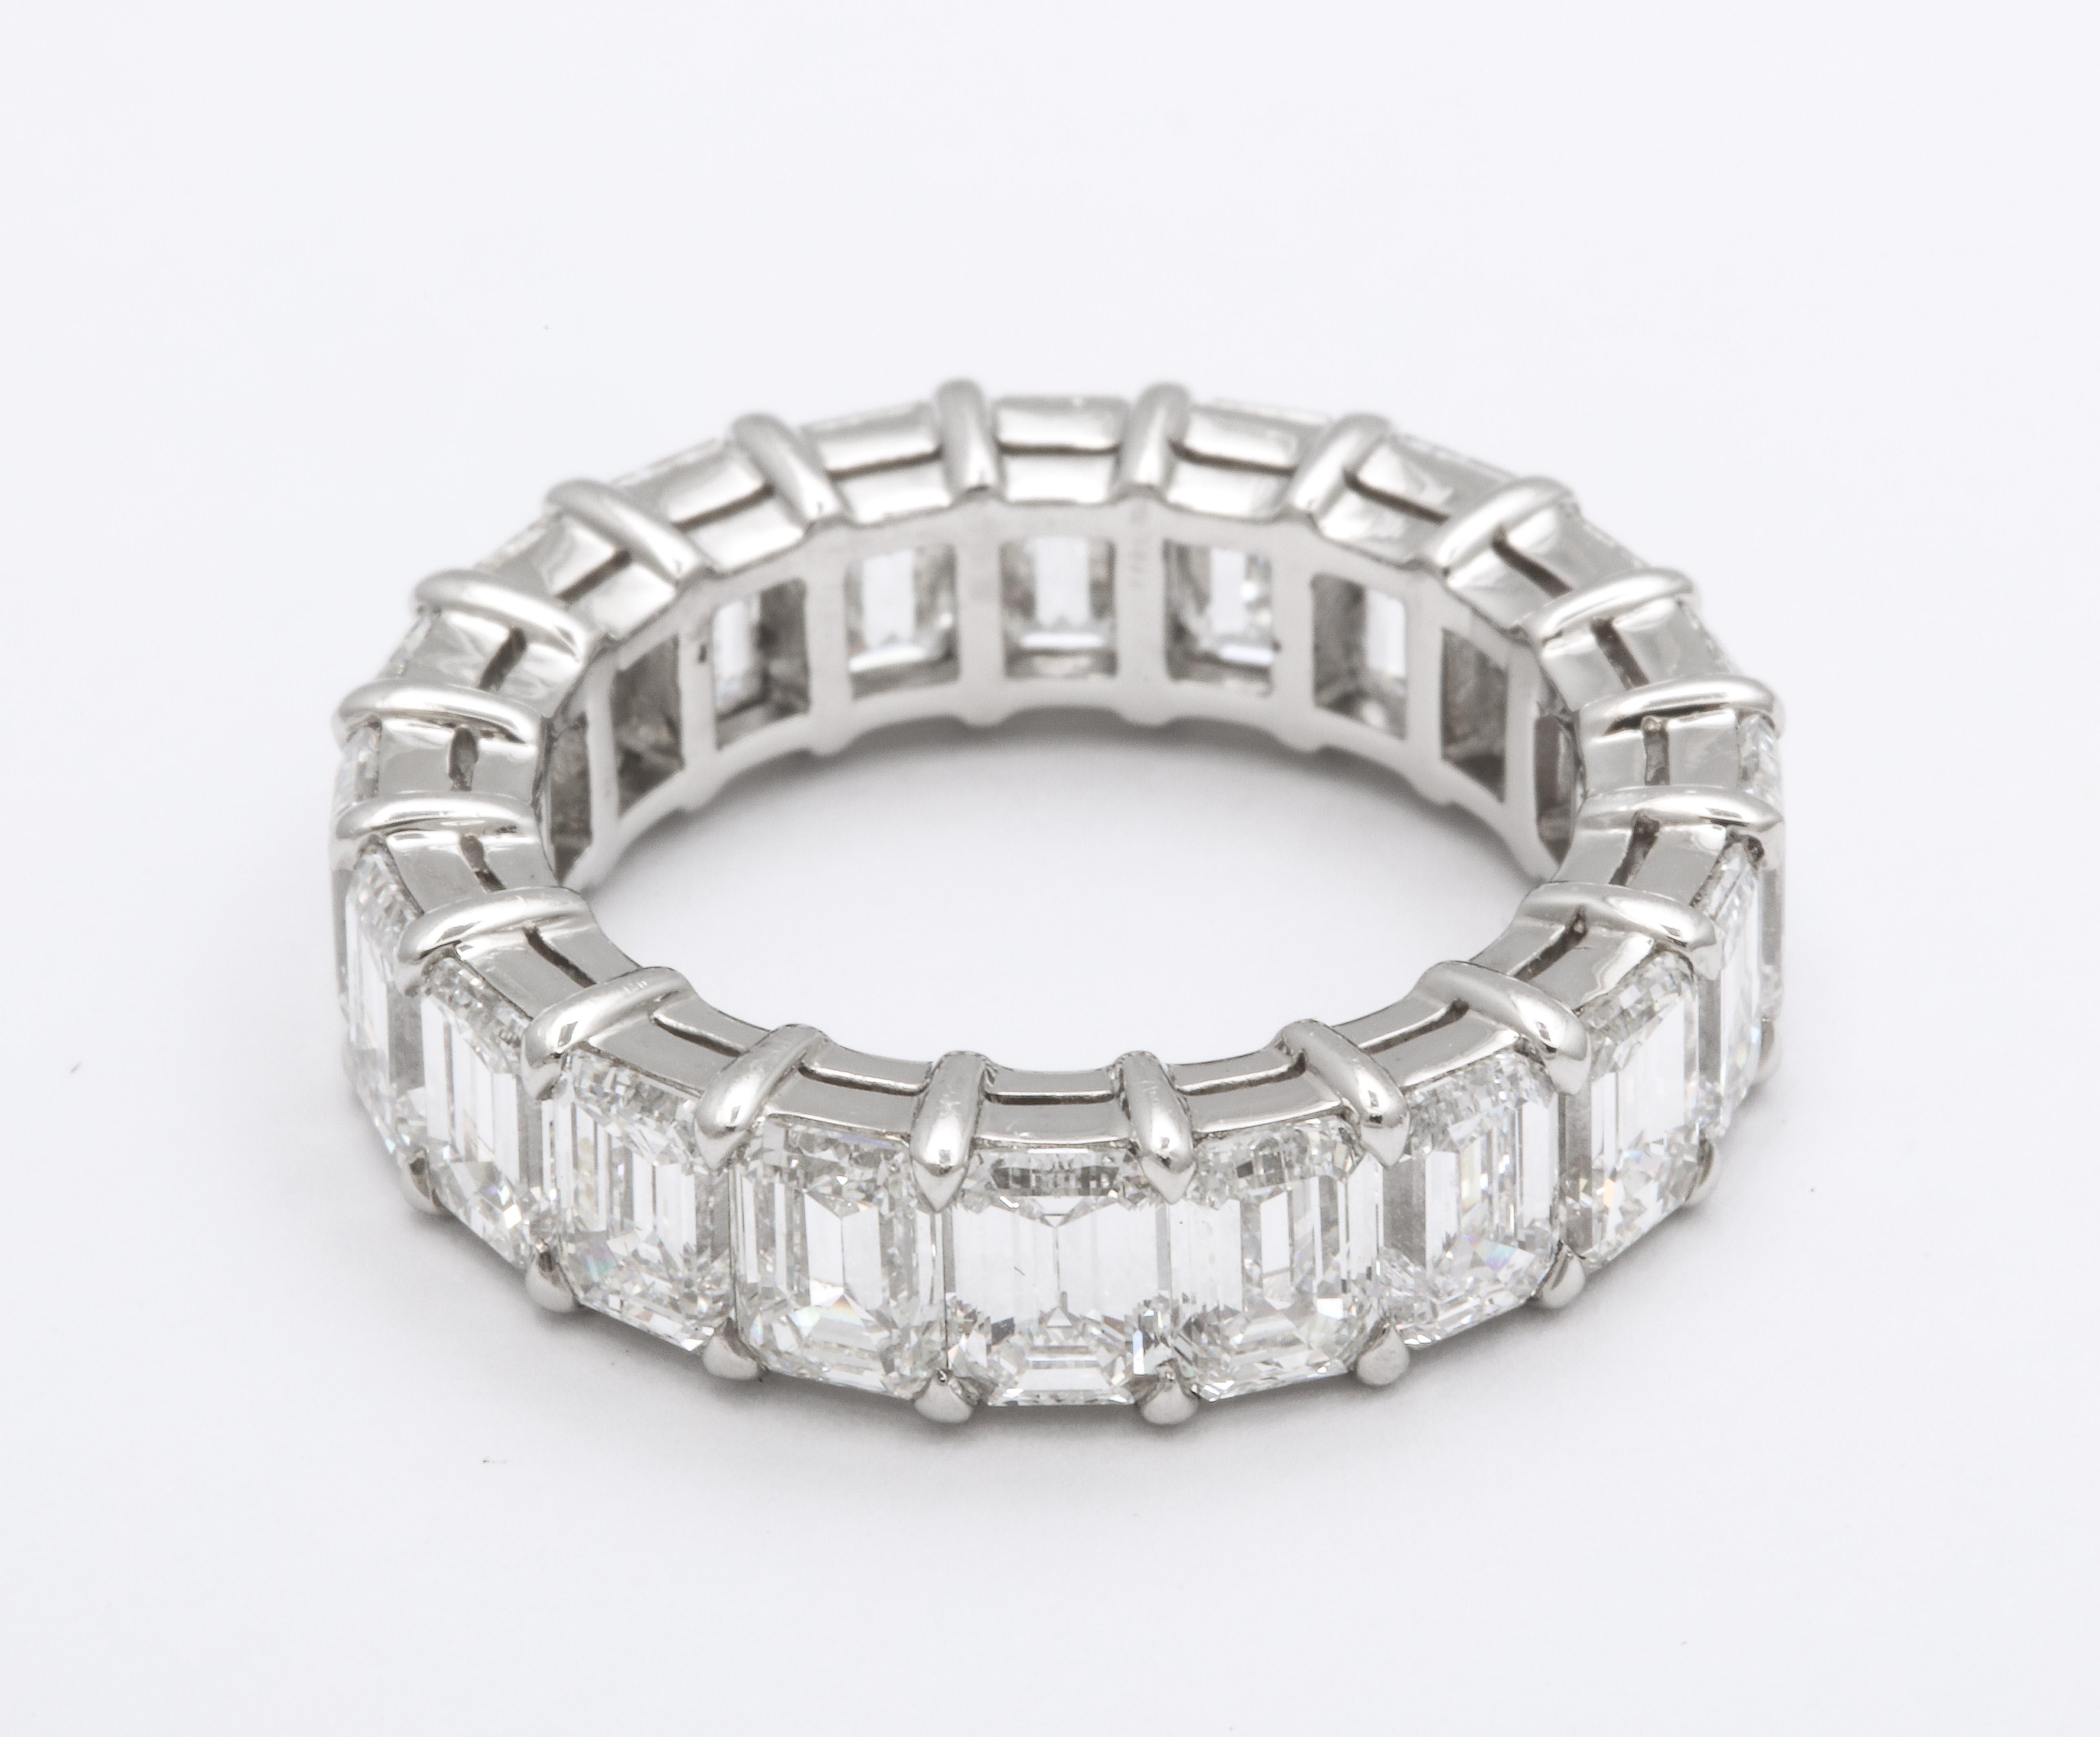 
A timeless band.

5.93 carats of white VS+ emerald cut diamonds set in a custom 18k white gold band.

Size 6

